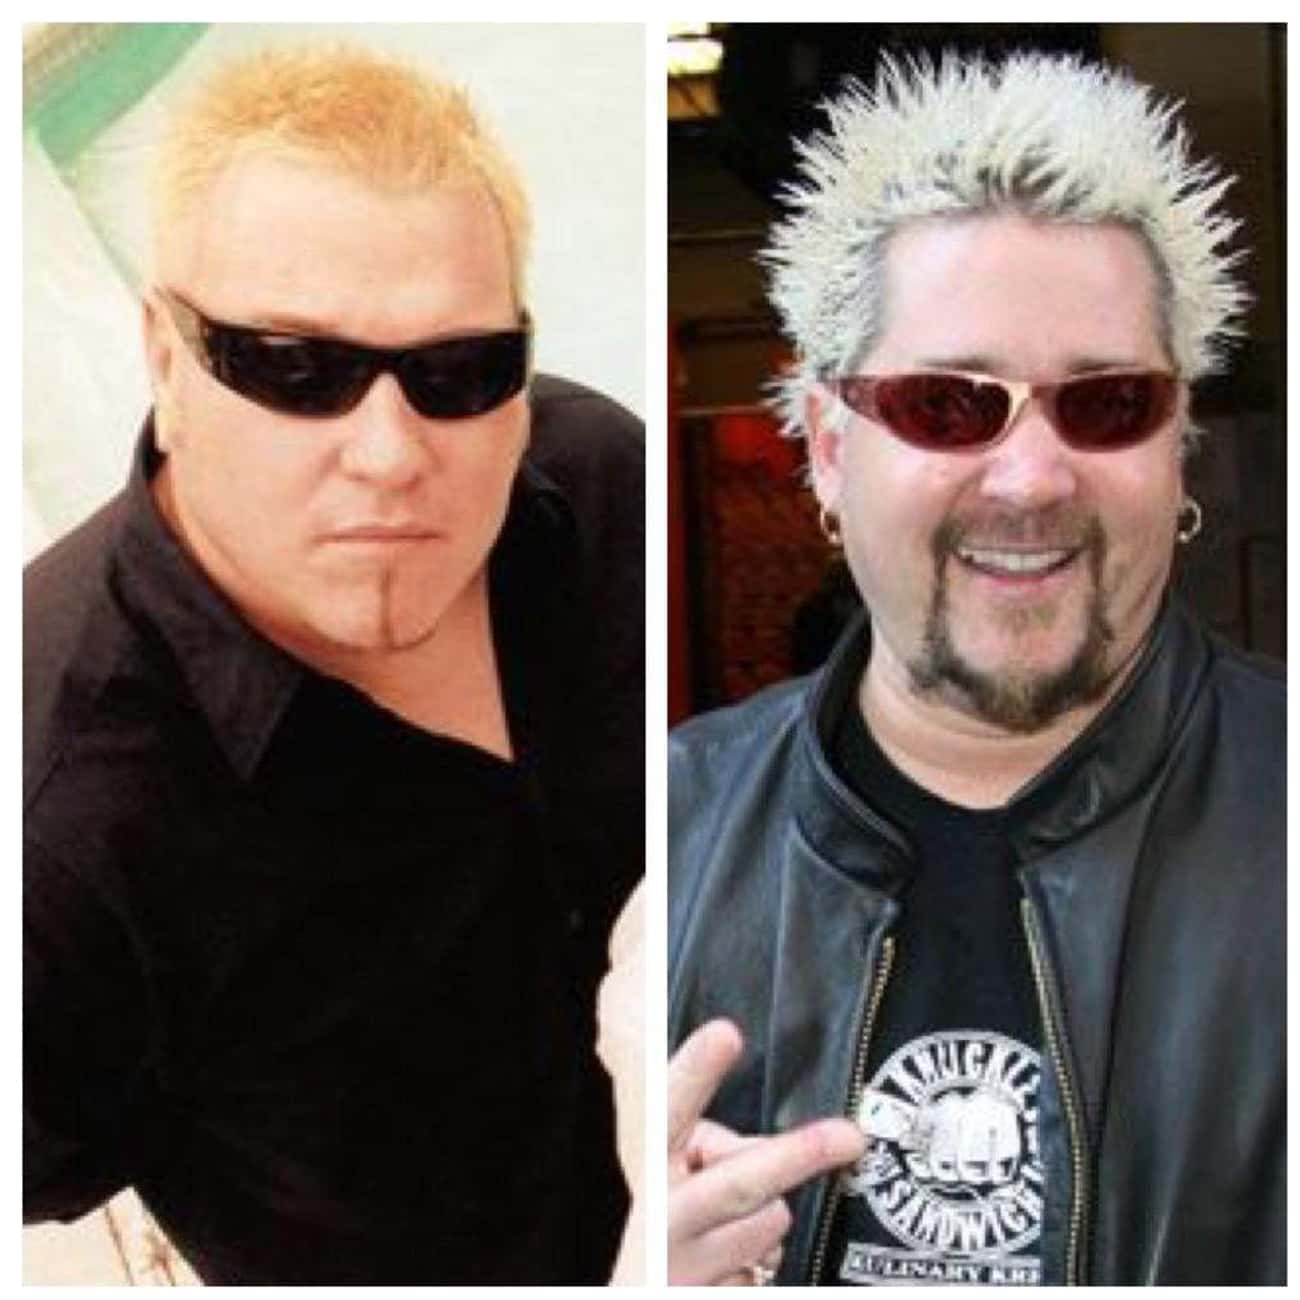 Guy Fieri And Steve Harwell Have Inverse Facial Hair